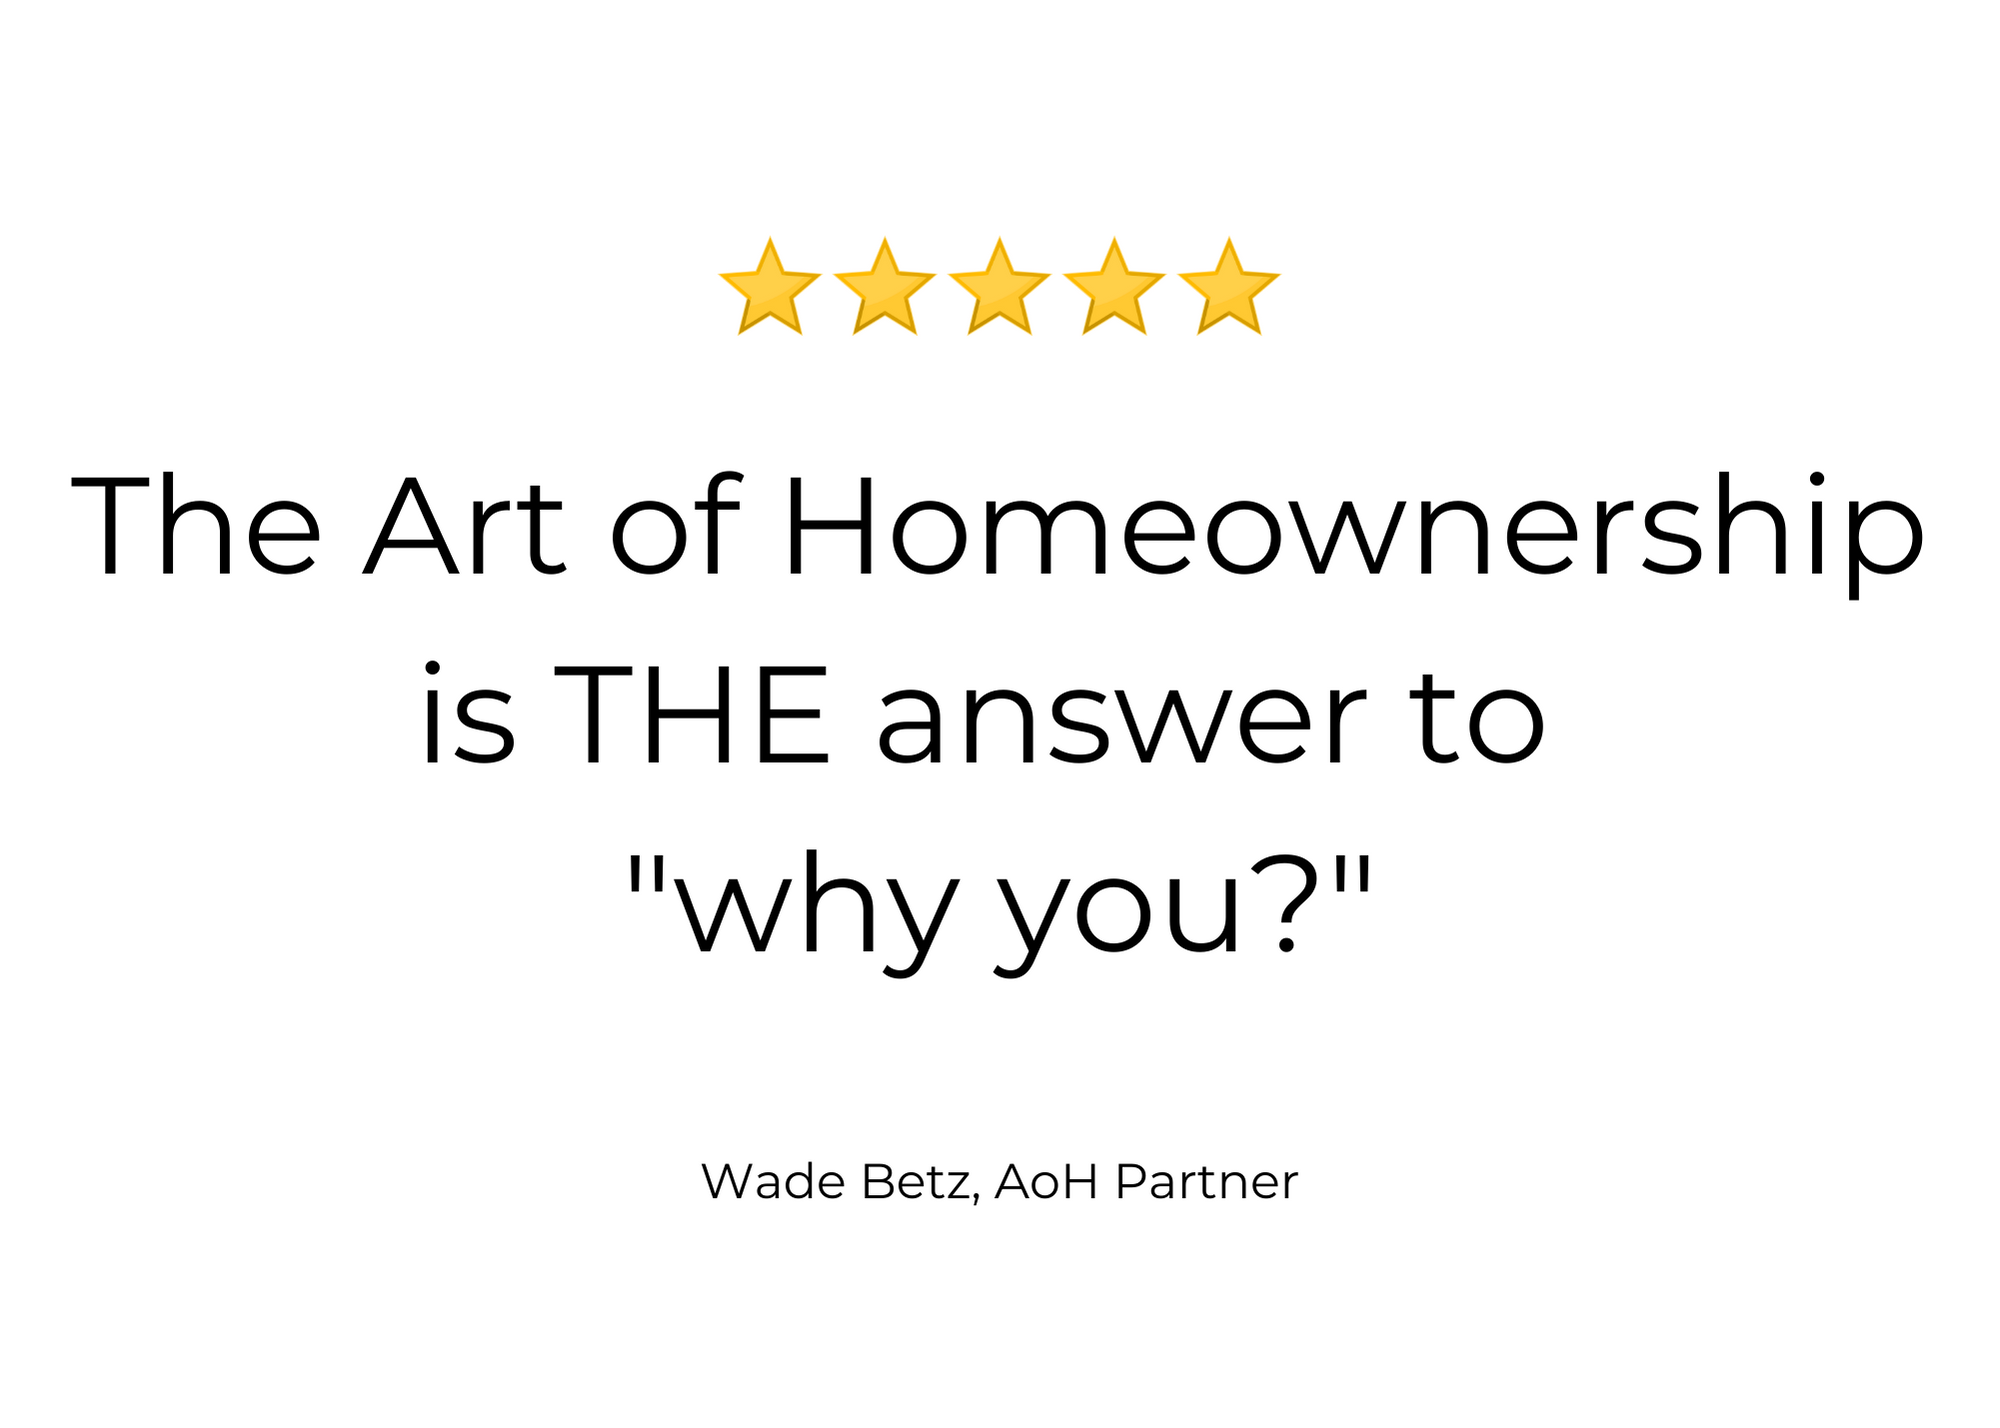 The Art of Homeownership is THE answer to why you